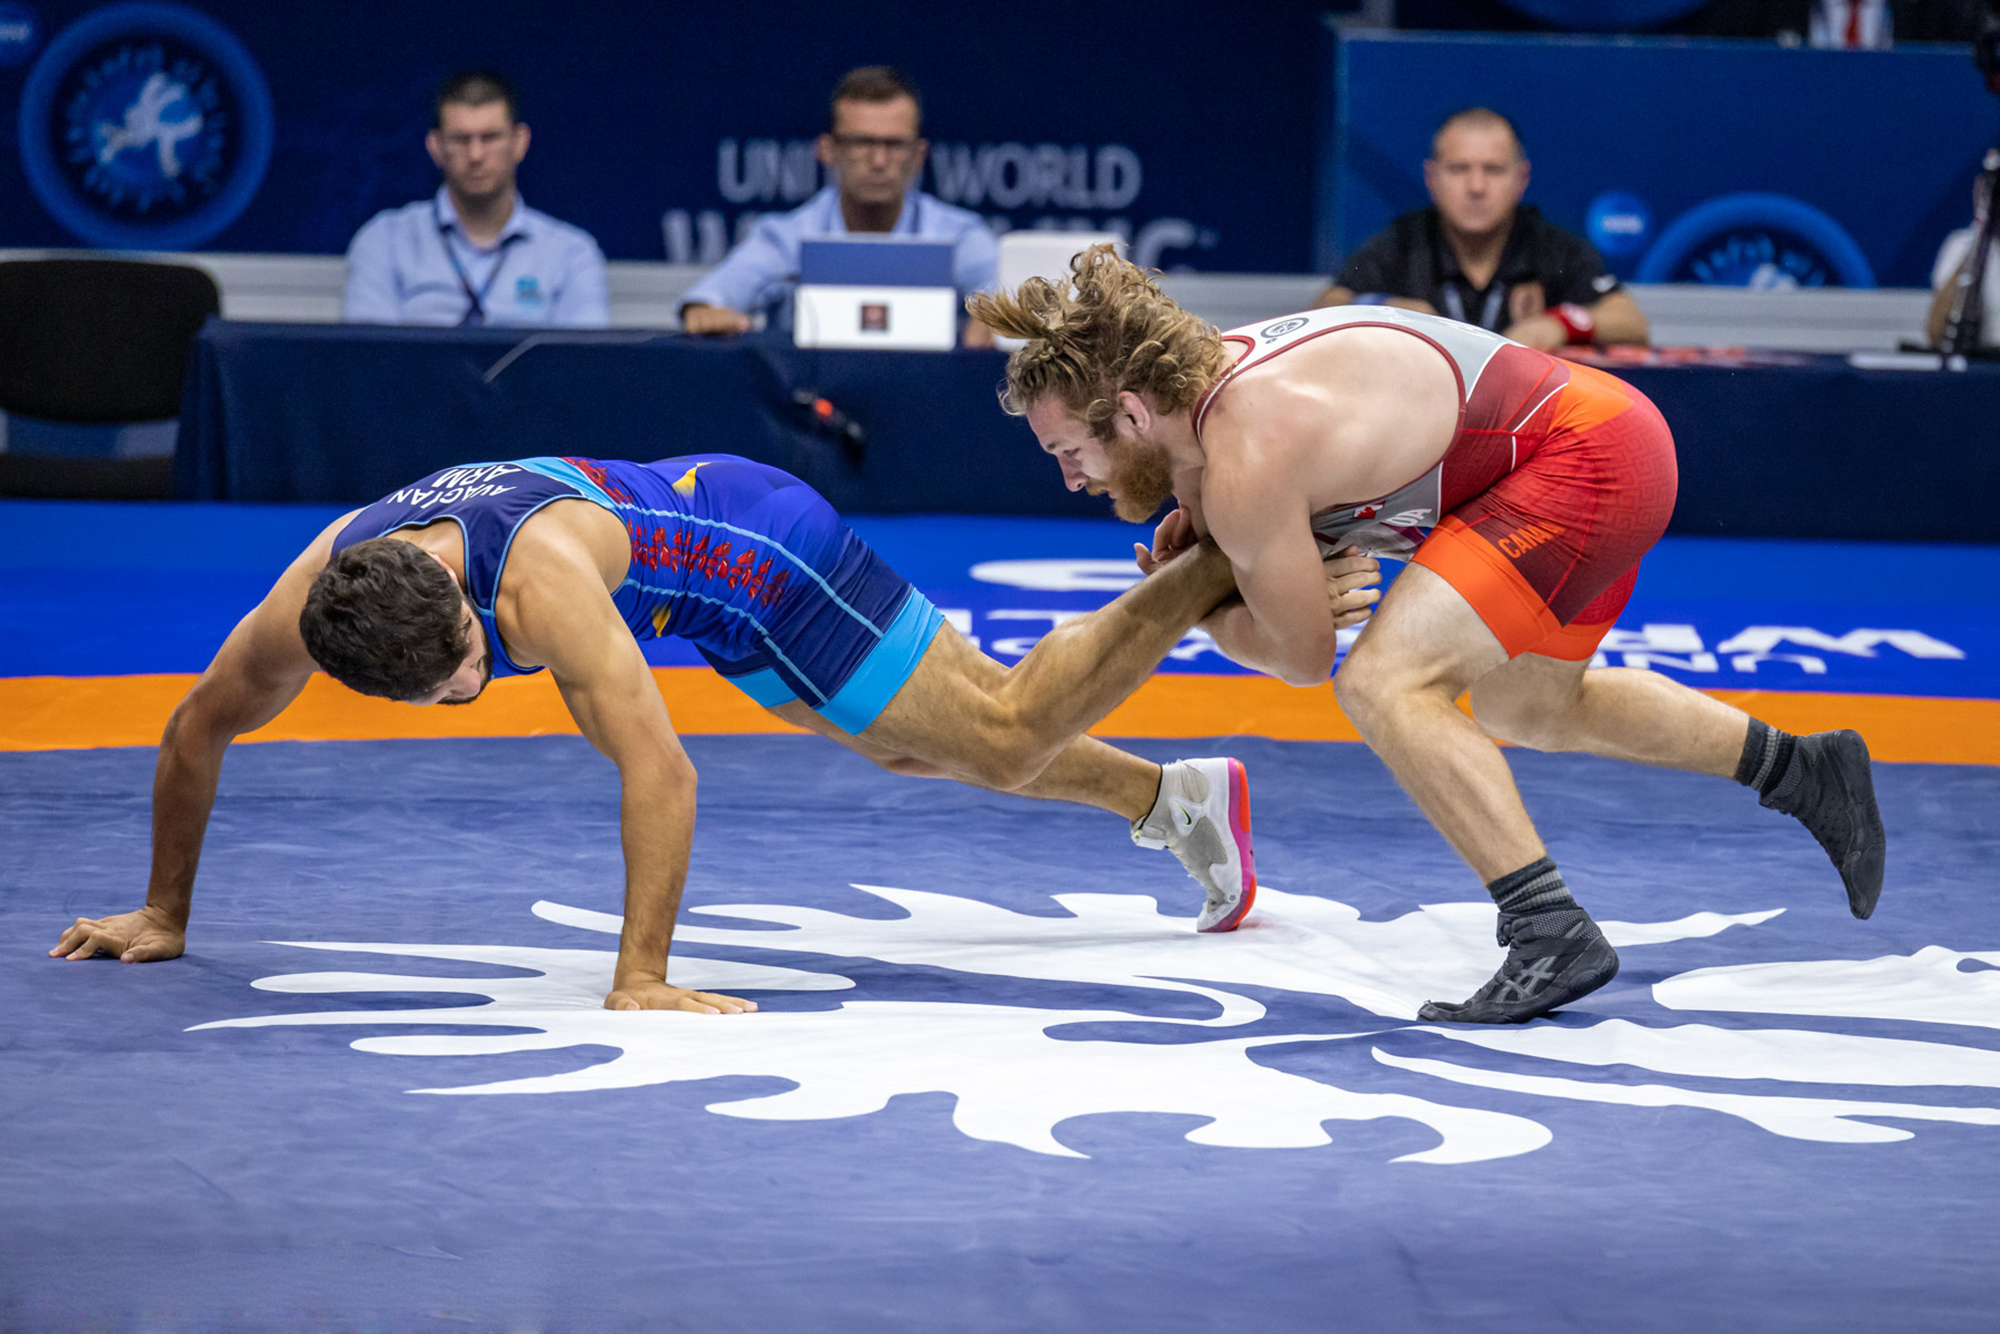 Wrestler Adam Thomson grabs his opponent by the left ankle in a match in Belgrade, Serbia.